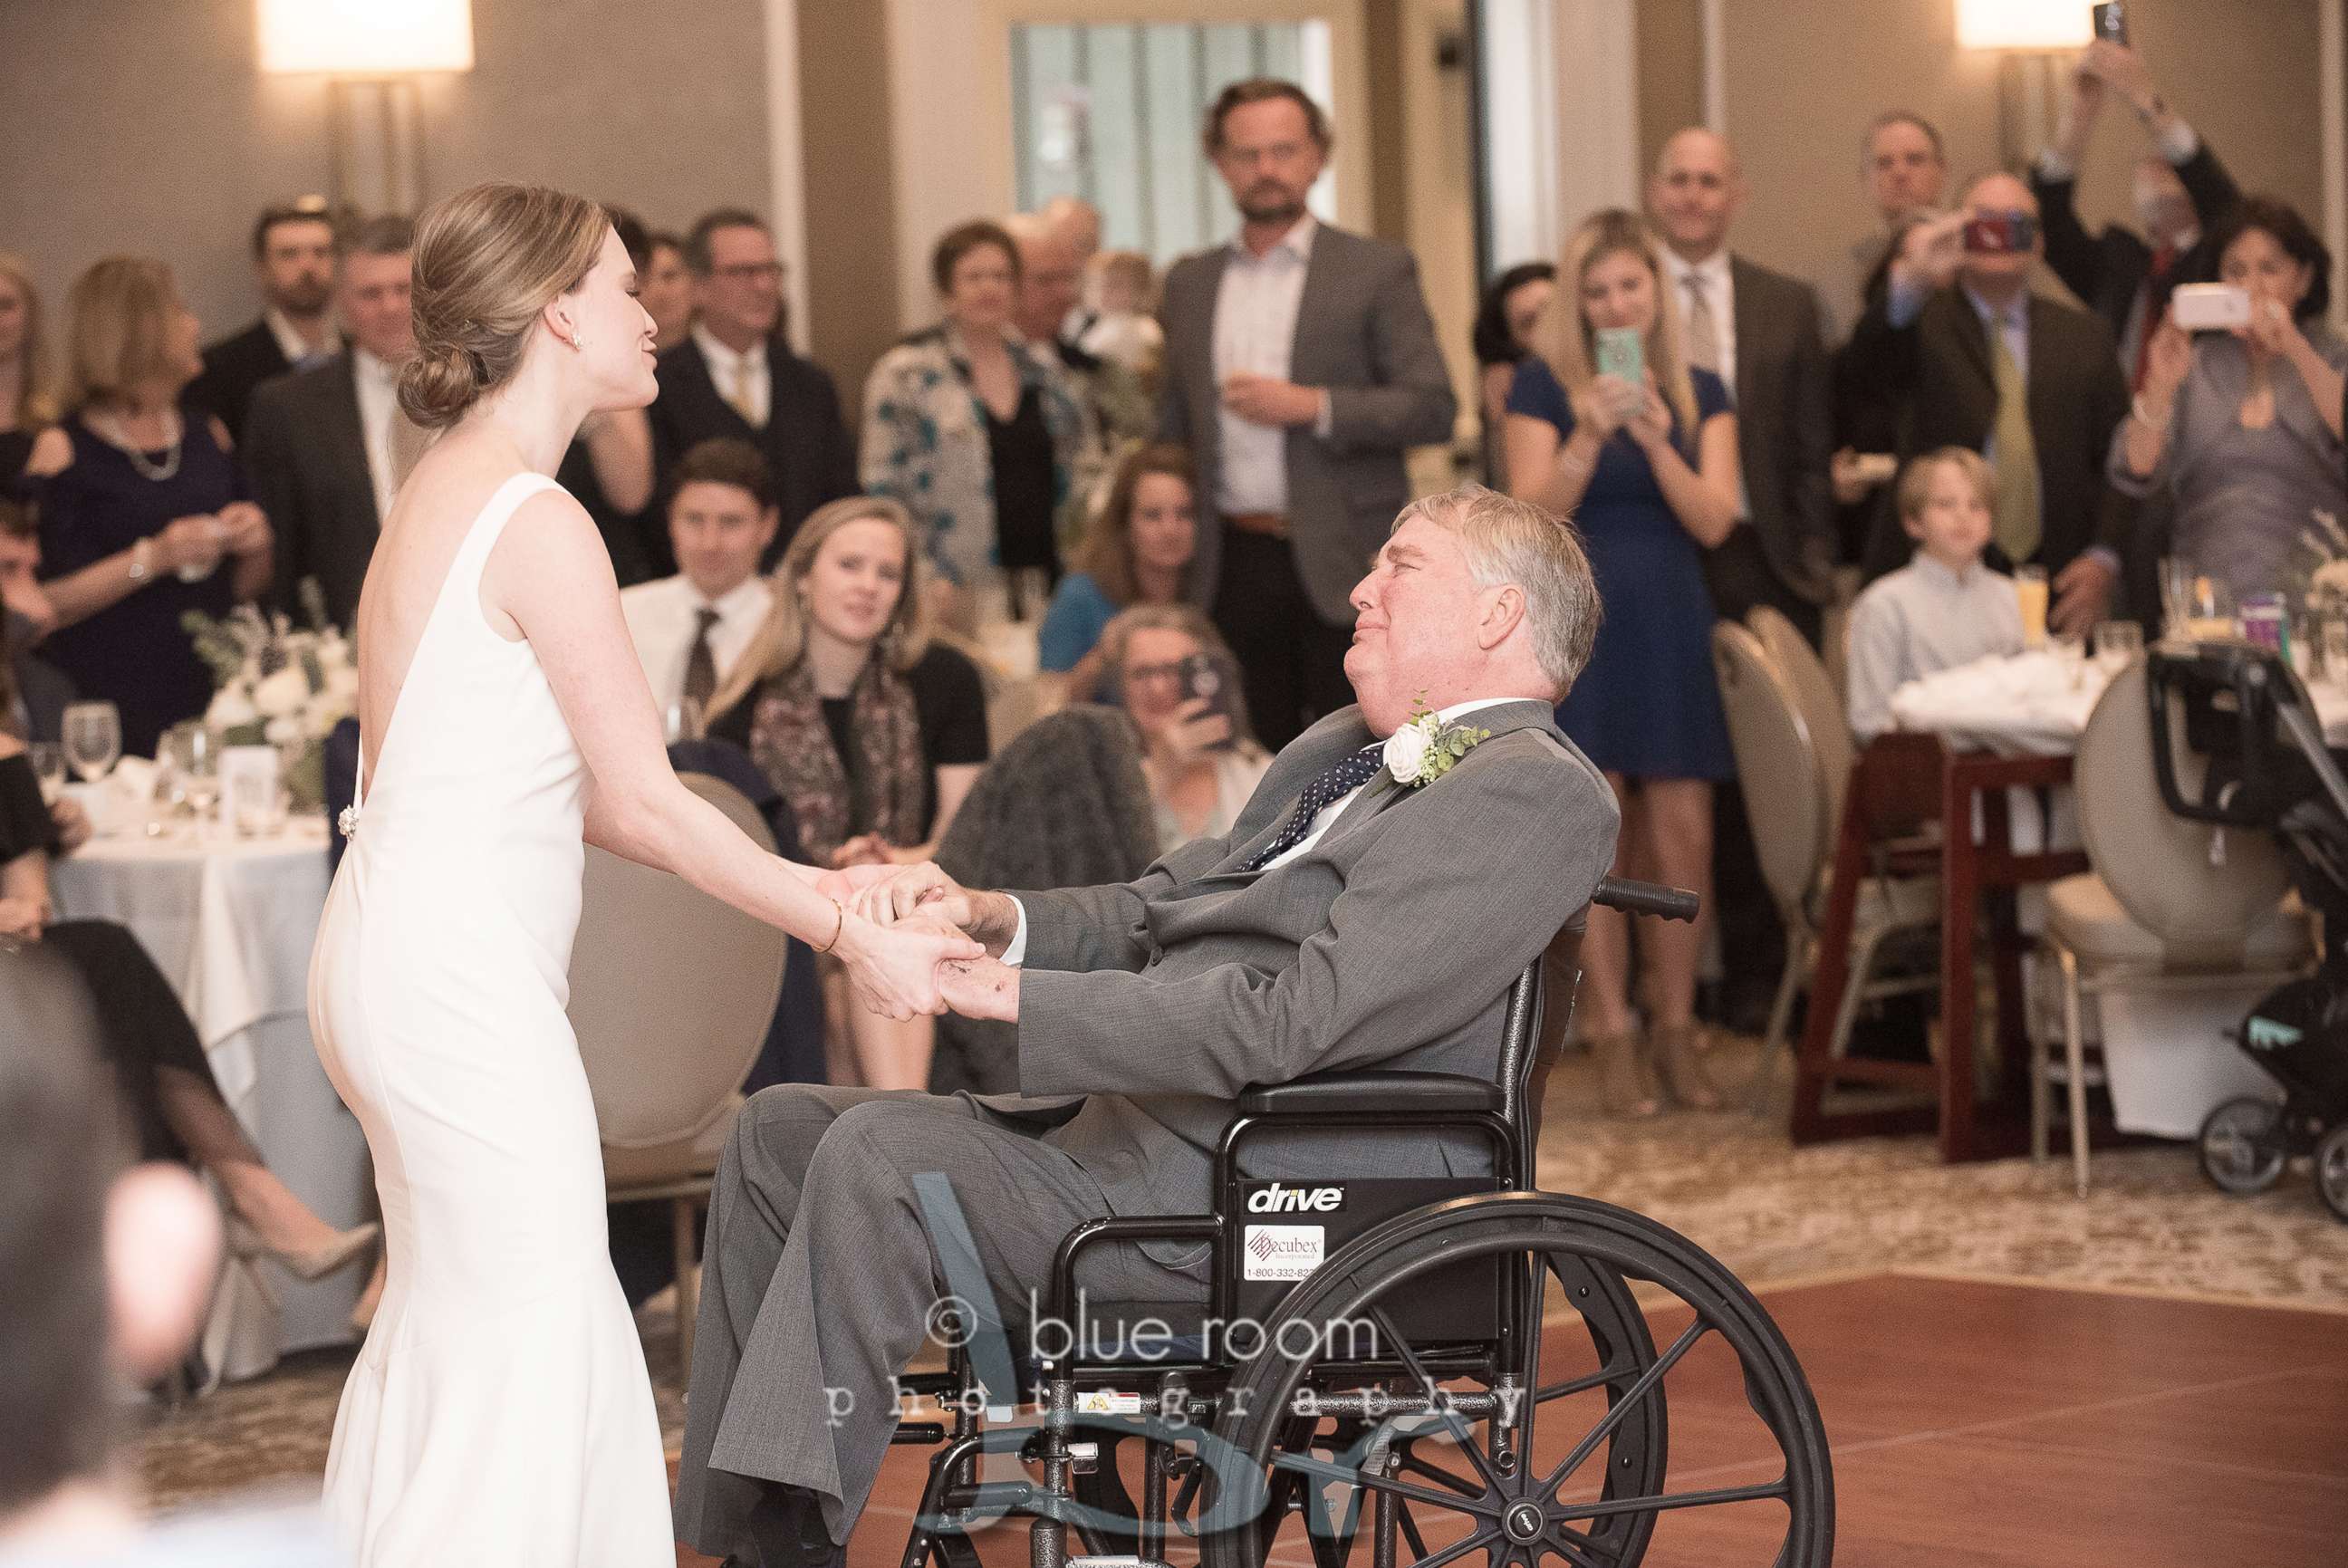 PHOTO: Mary Bourne Butts and her dad, Jim Roberts, shared a special first dance at her Dec. 29, 2018, wedding in Alabama.